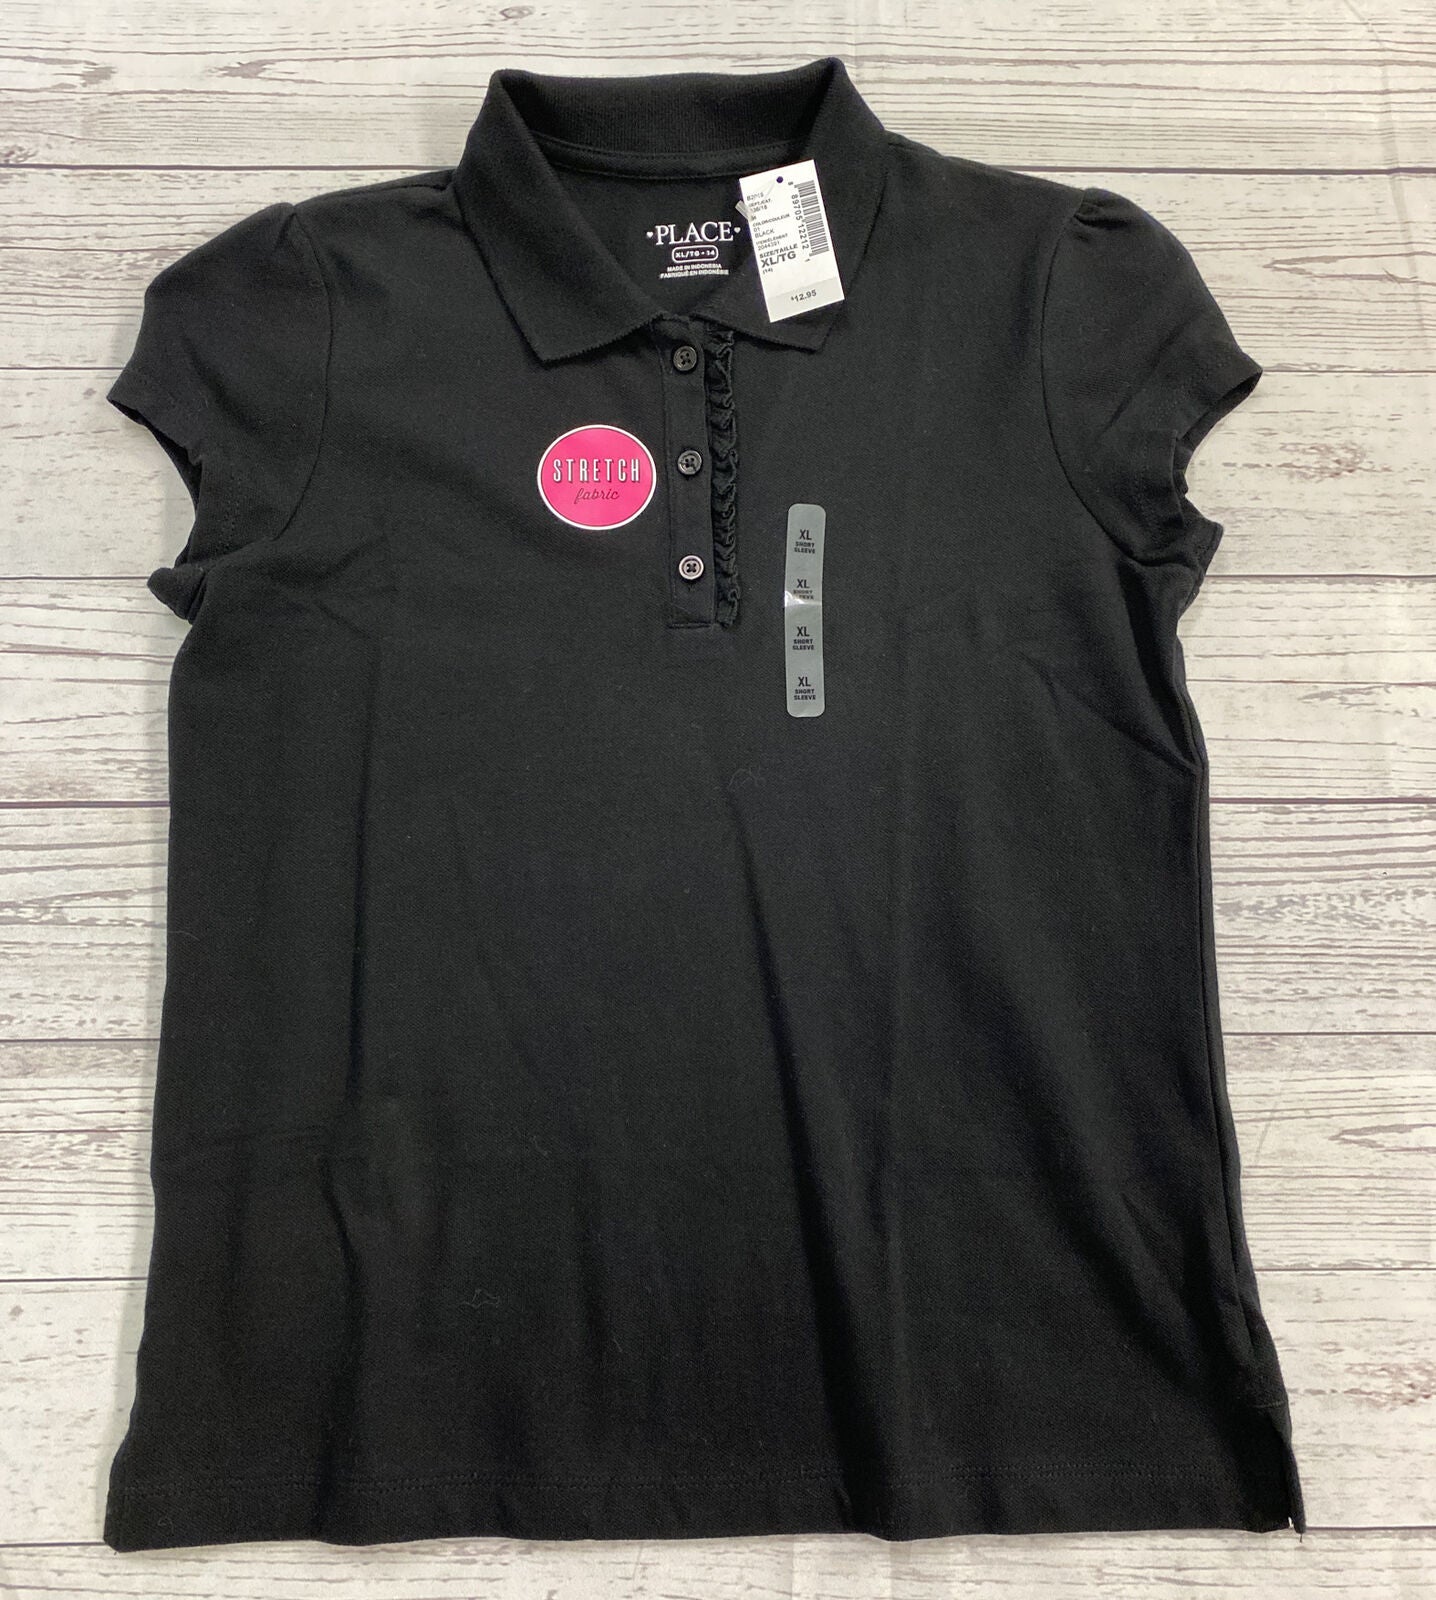 The Children's Place Girls Black Short Sleeve Polo Top Size XL (14) NWT